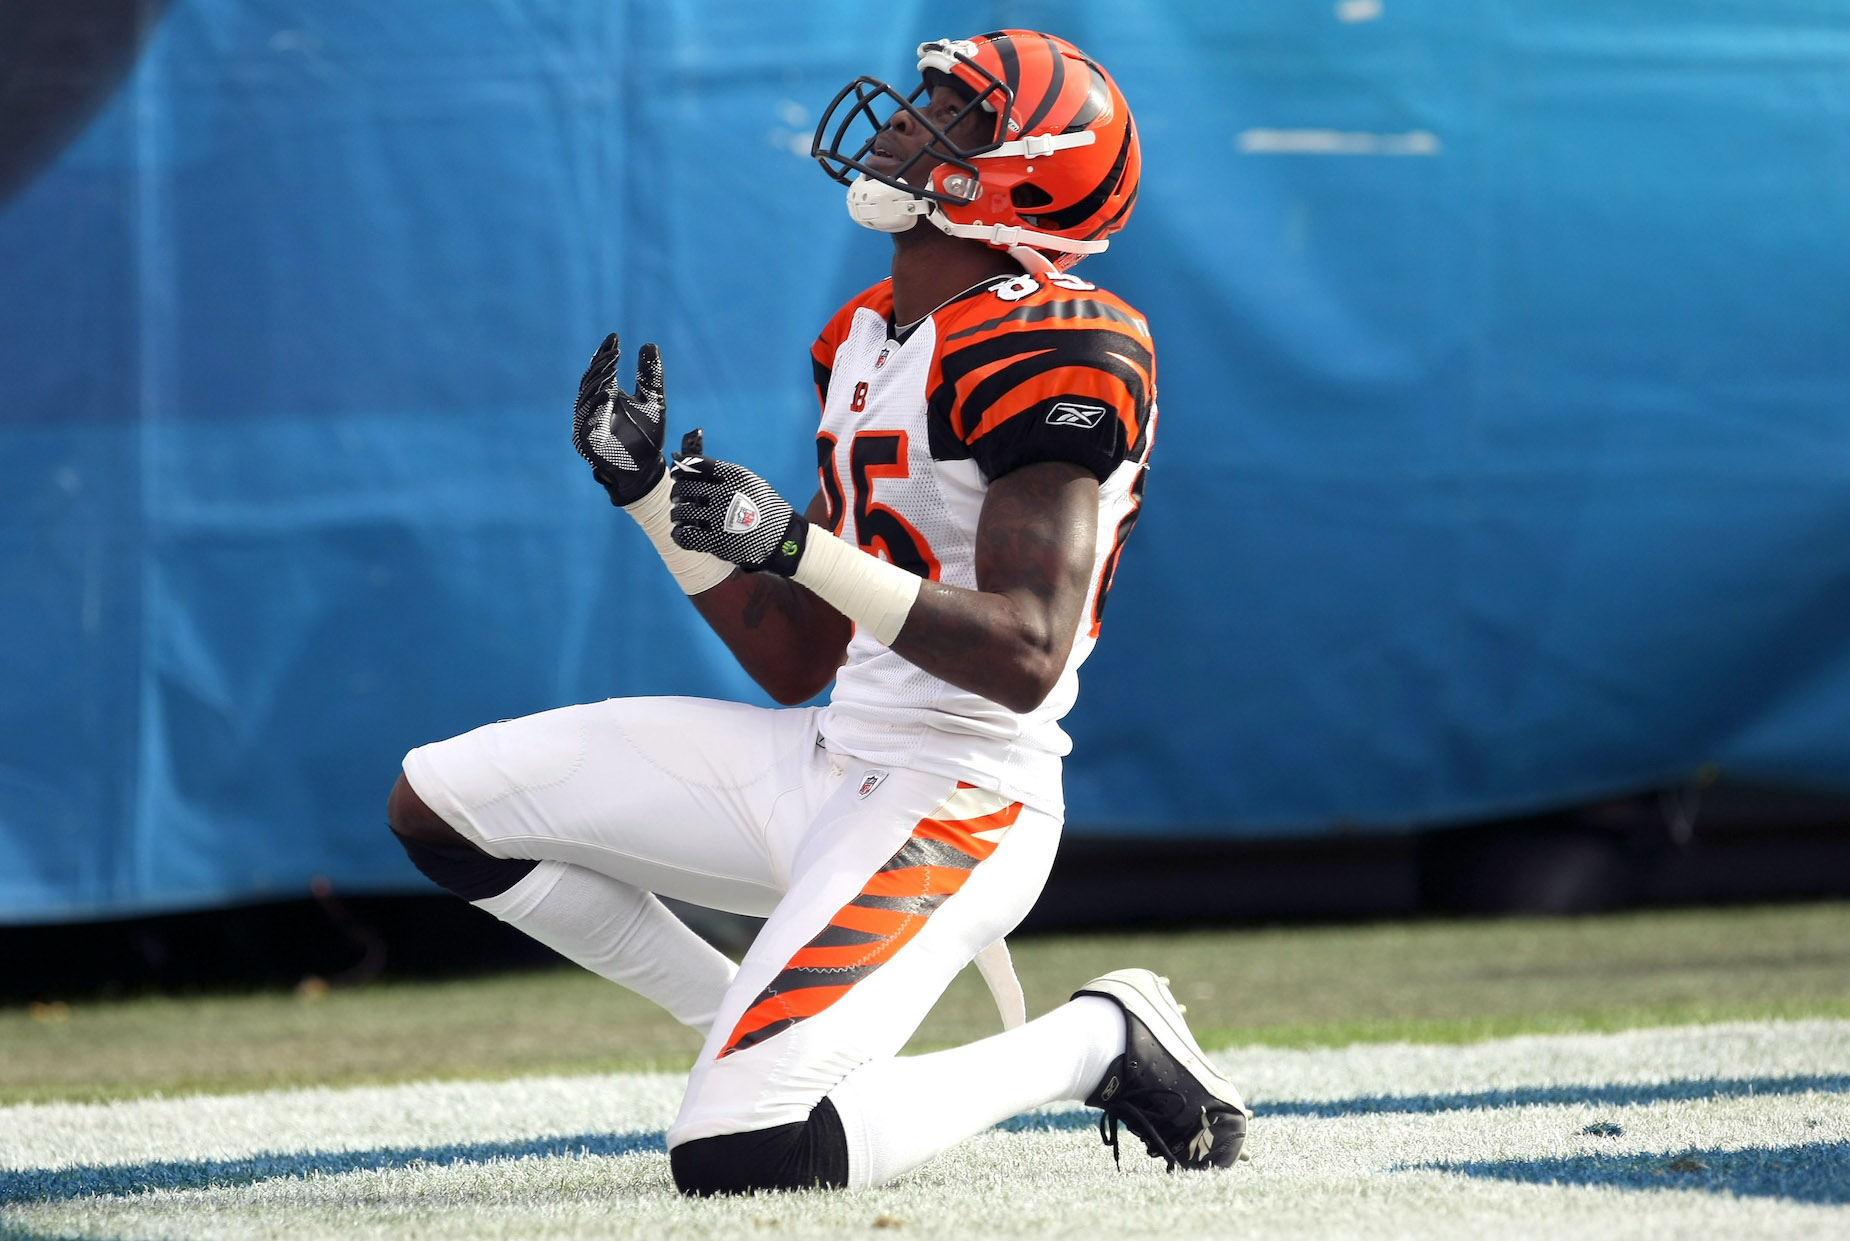 Bengals receiver Chad Johnson never got to perform his favorite touchdown celebration.